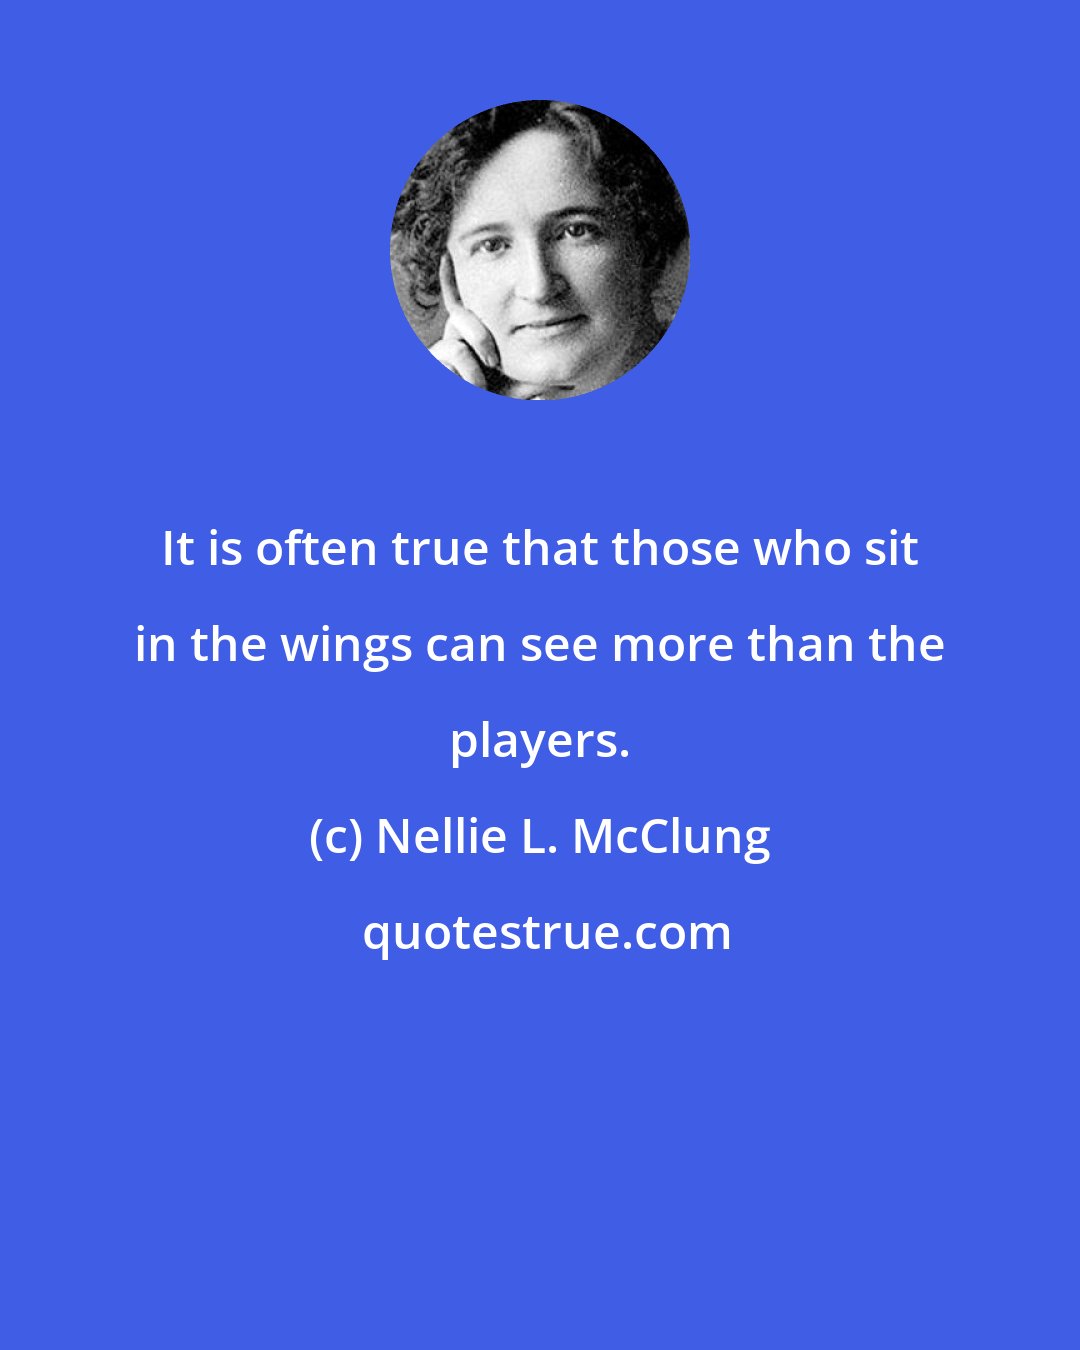 Nellie L. McClung: It is often true that those who sit in the wings can see more than the players.